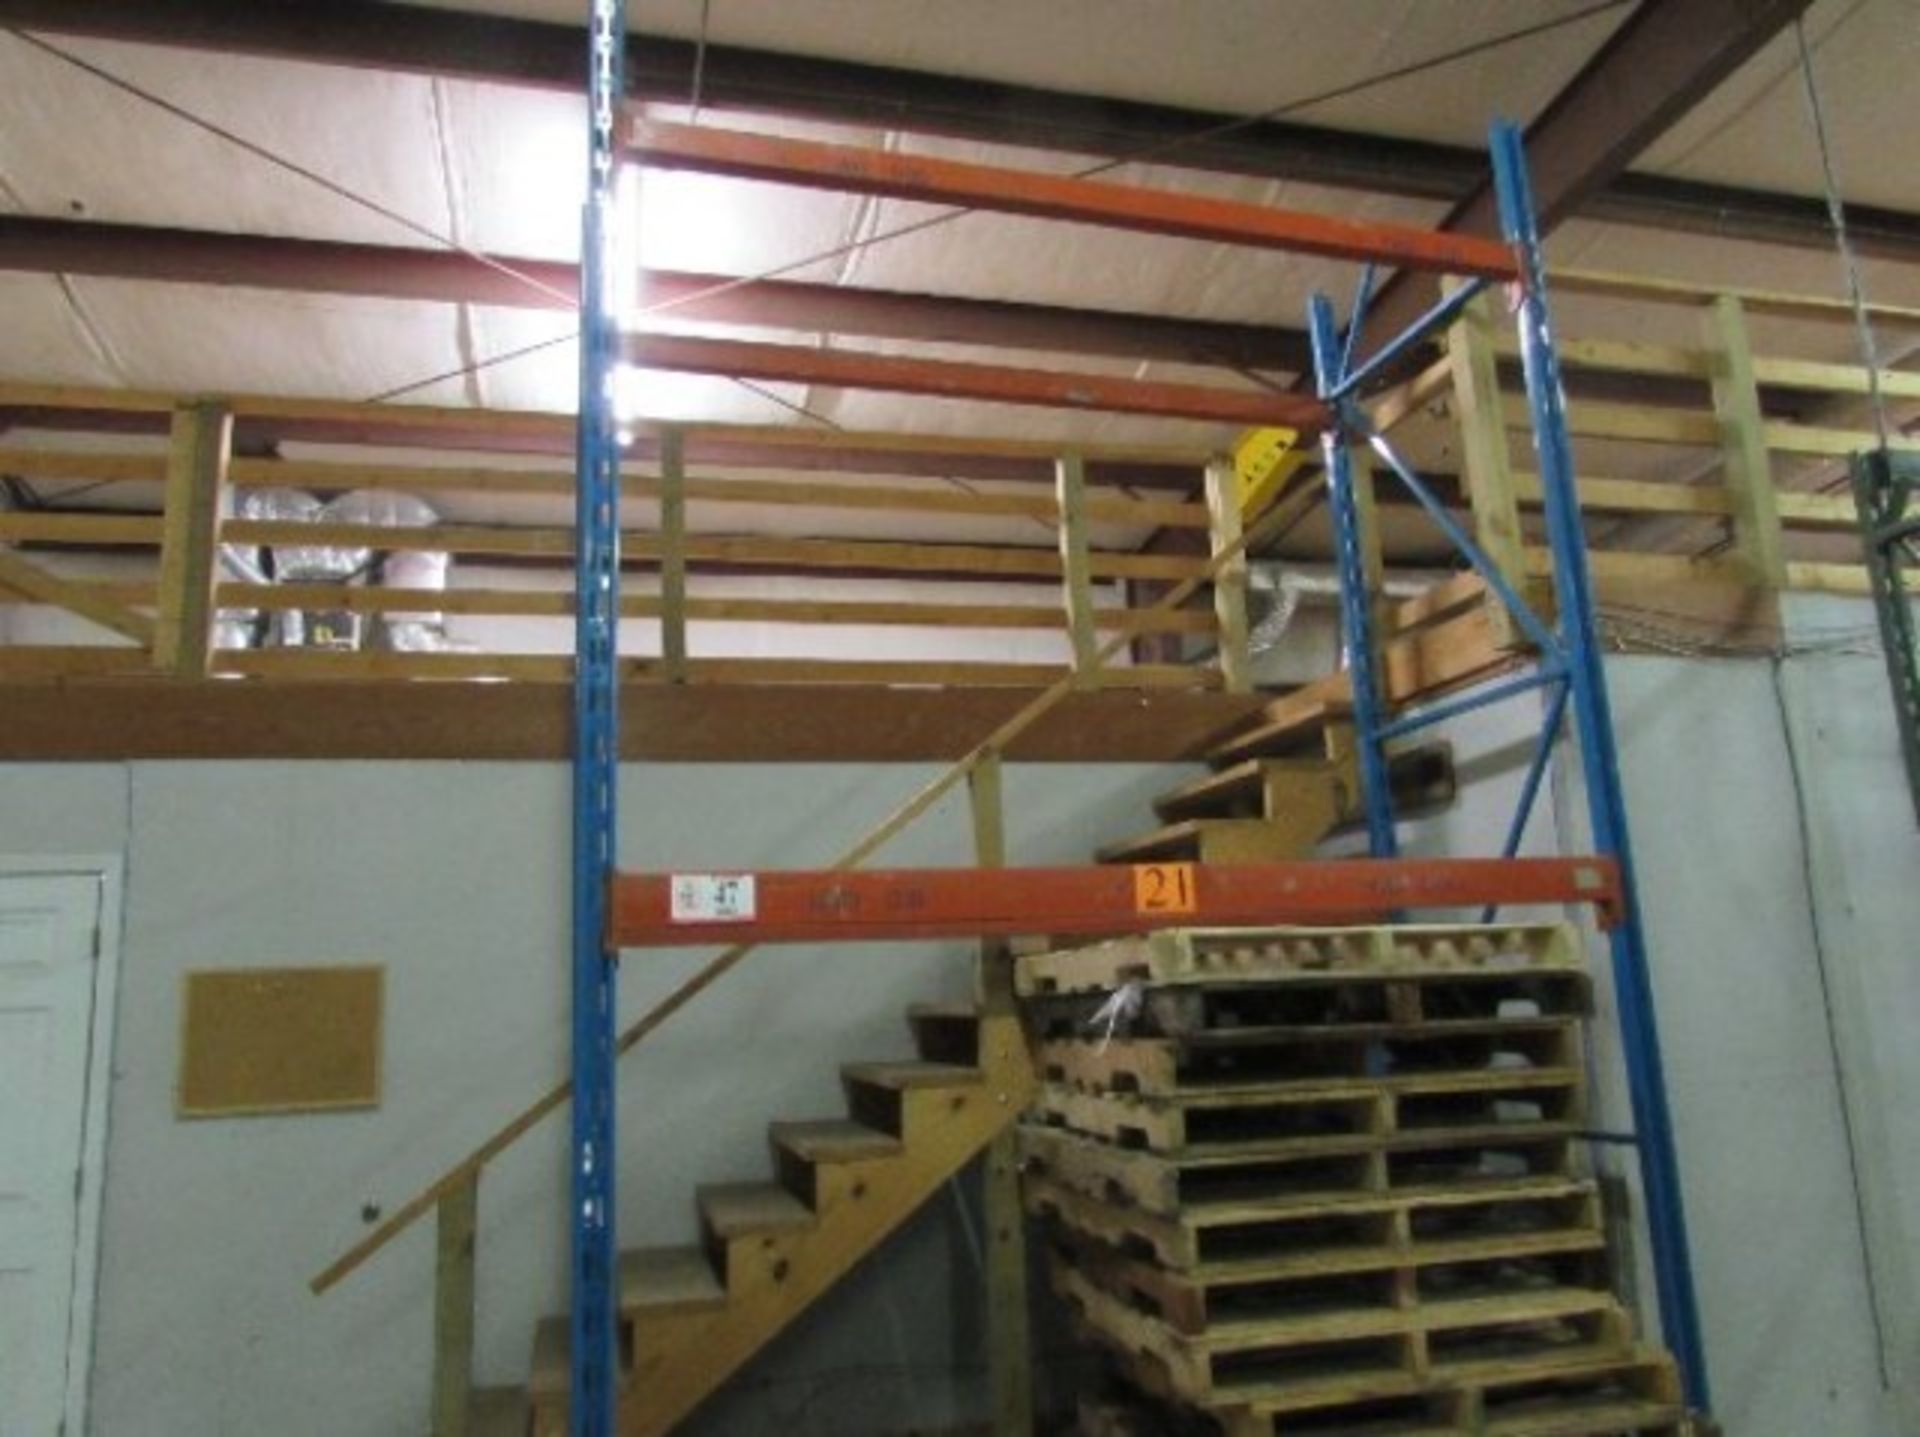 (2) Sections of Pallet Racking 42" x 96" x 168", individual sections not sharing a common center